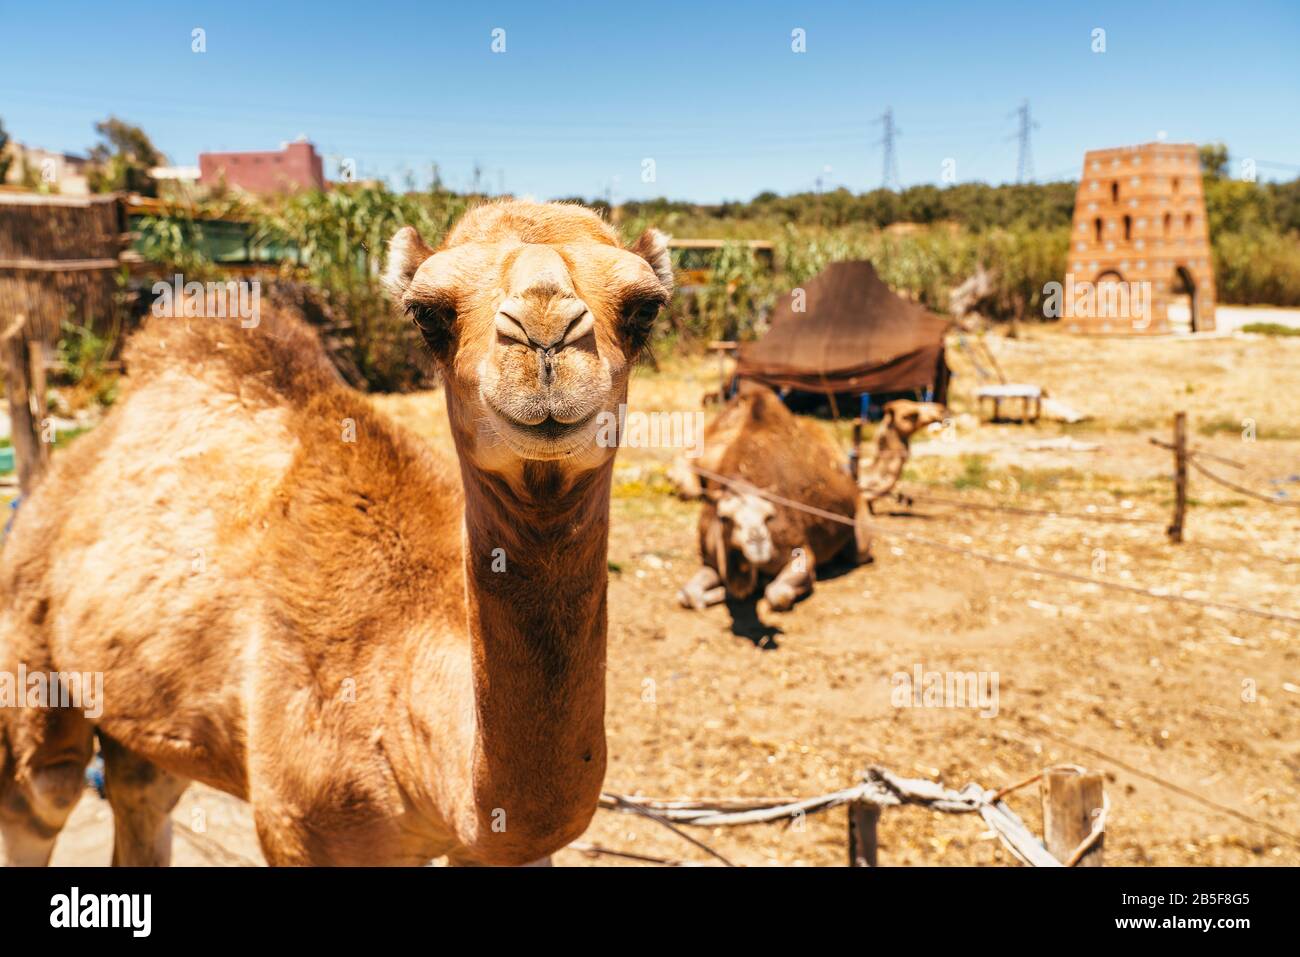 First plane of camel and dromedary in Mequinenza, near Fez, Morocco. Stock Photo